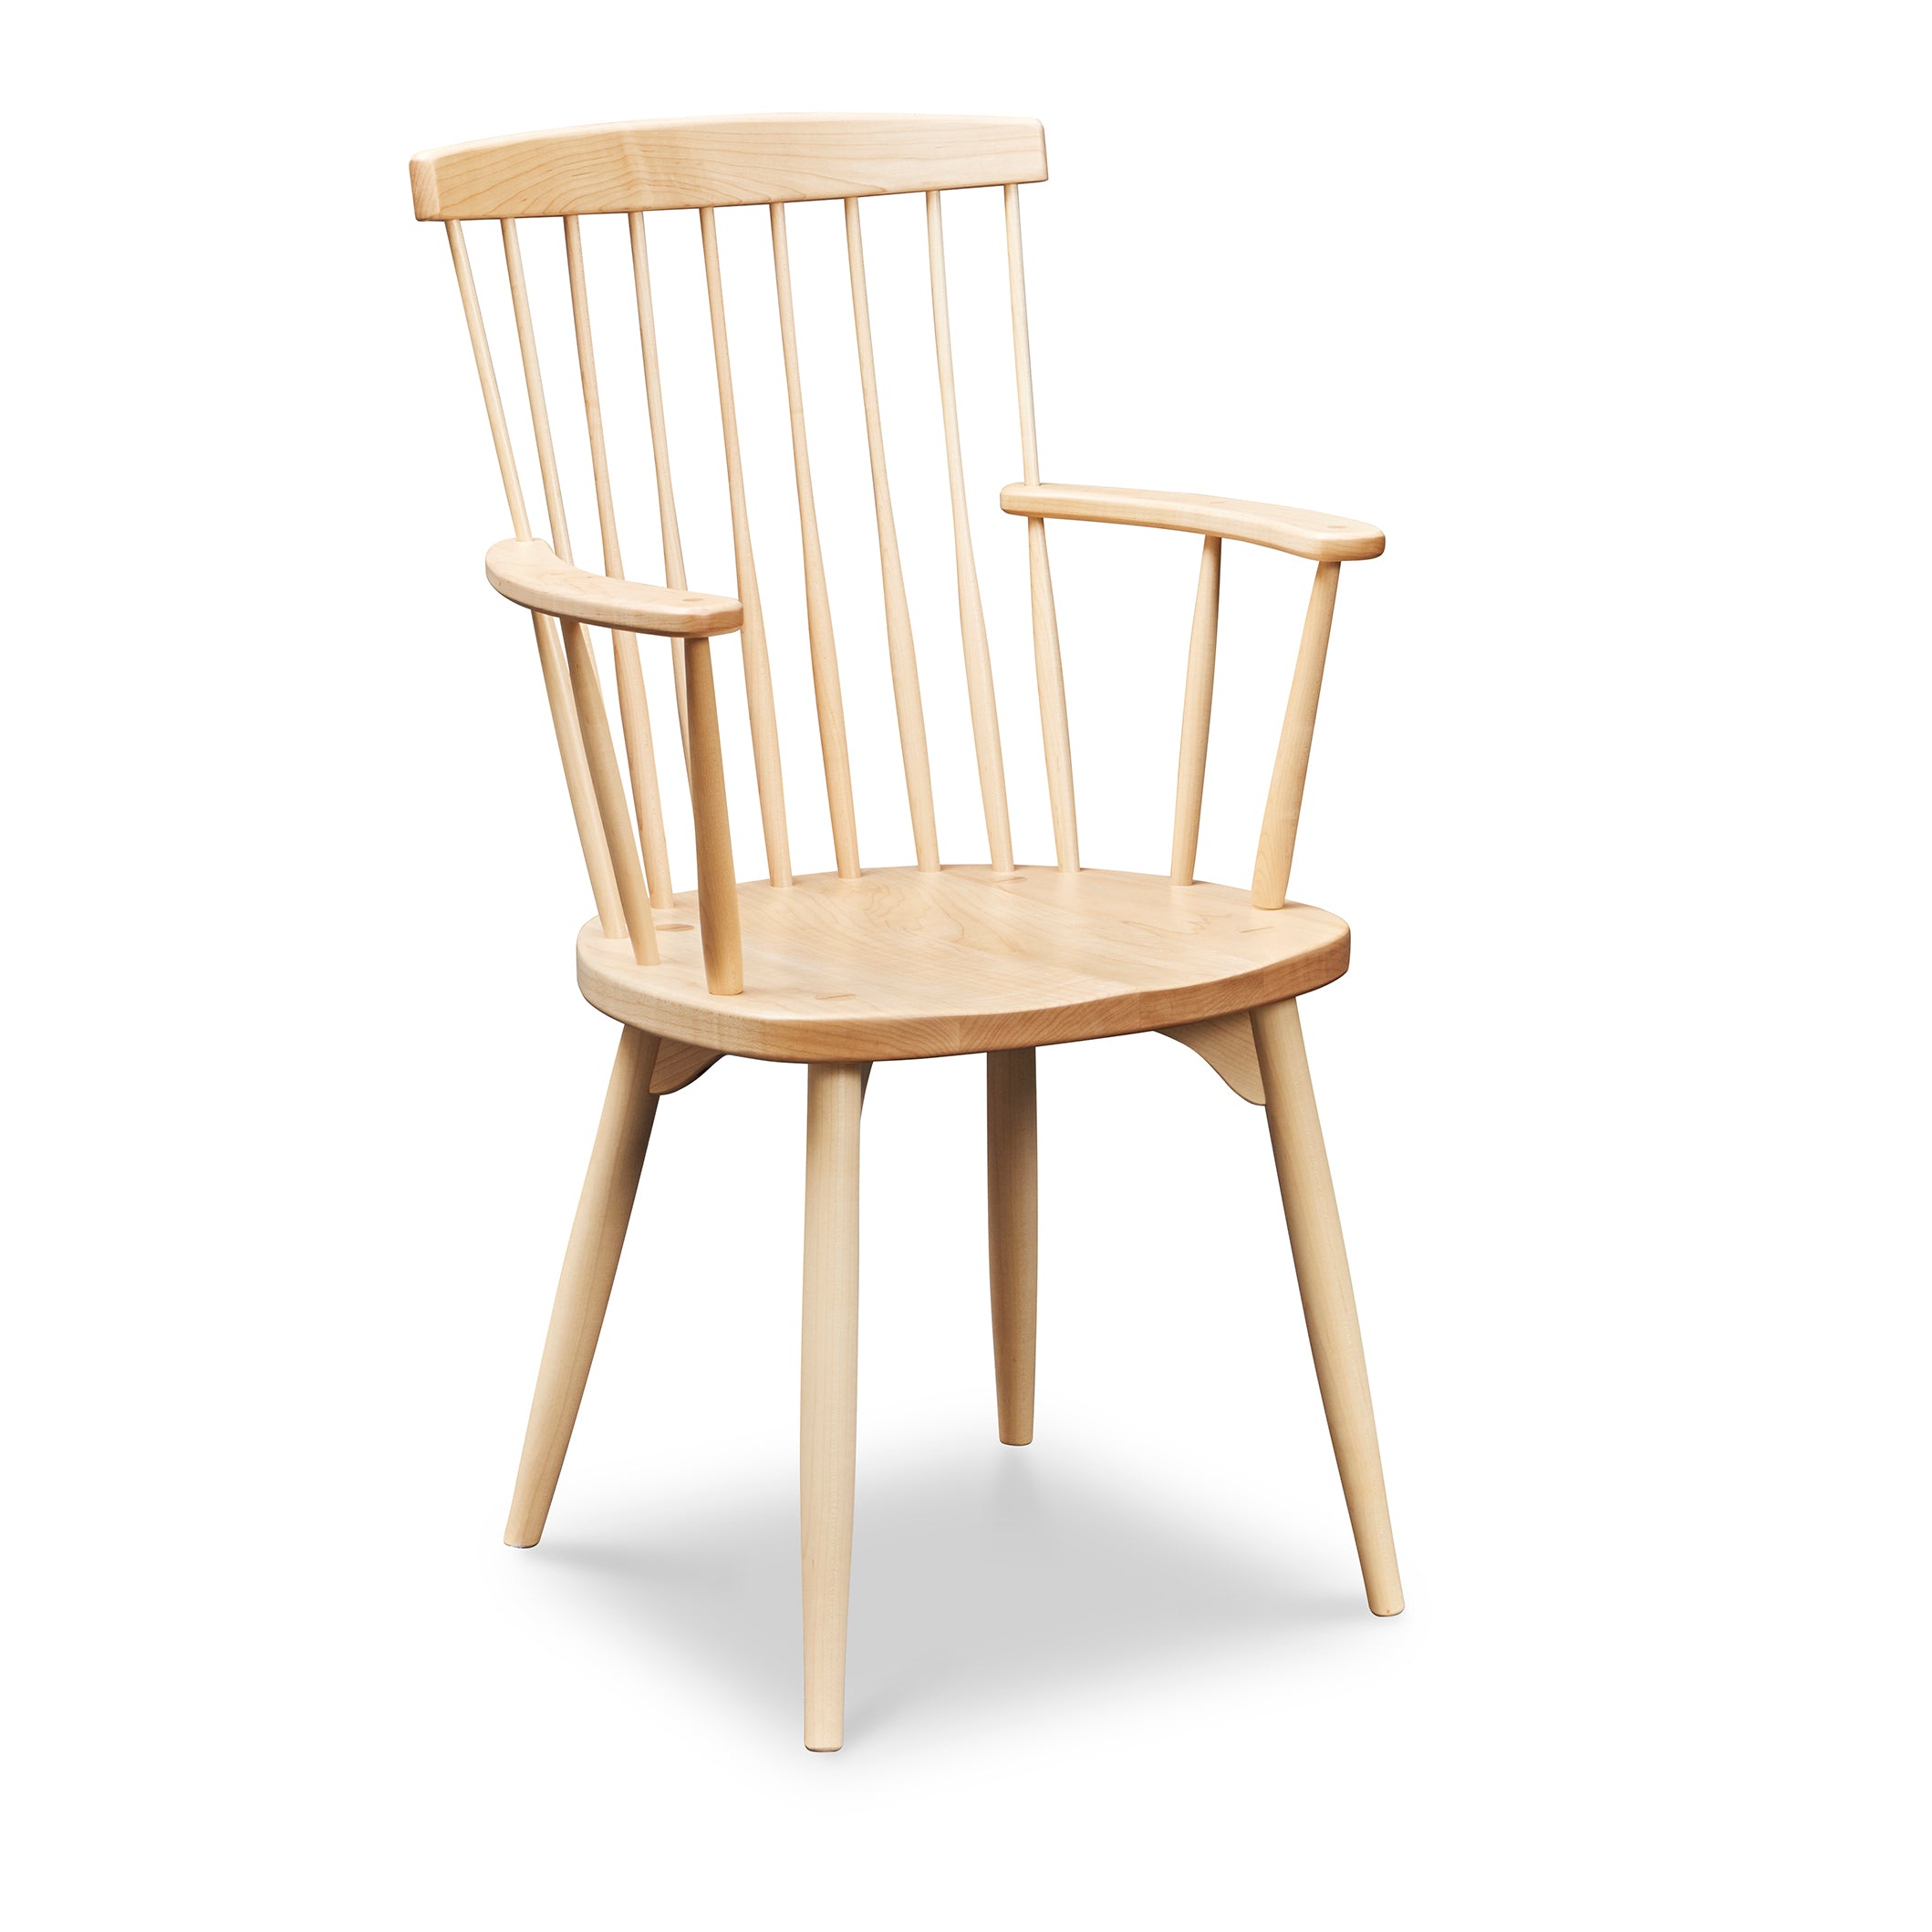 Chilton Spindle Arm Chair in solid maple wood